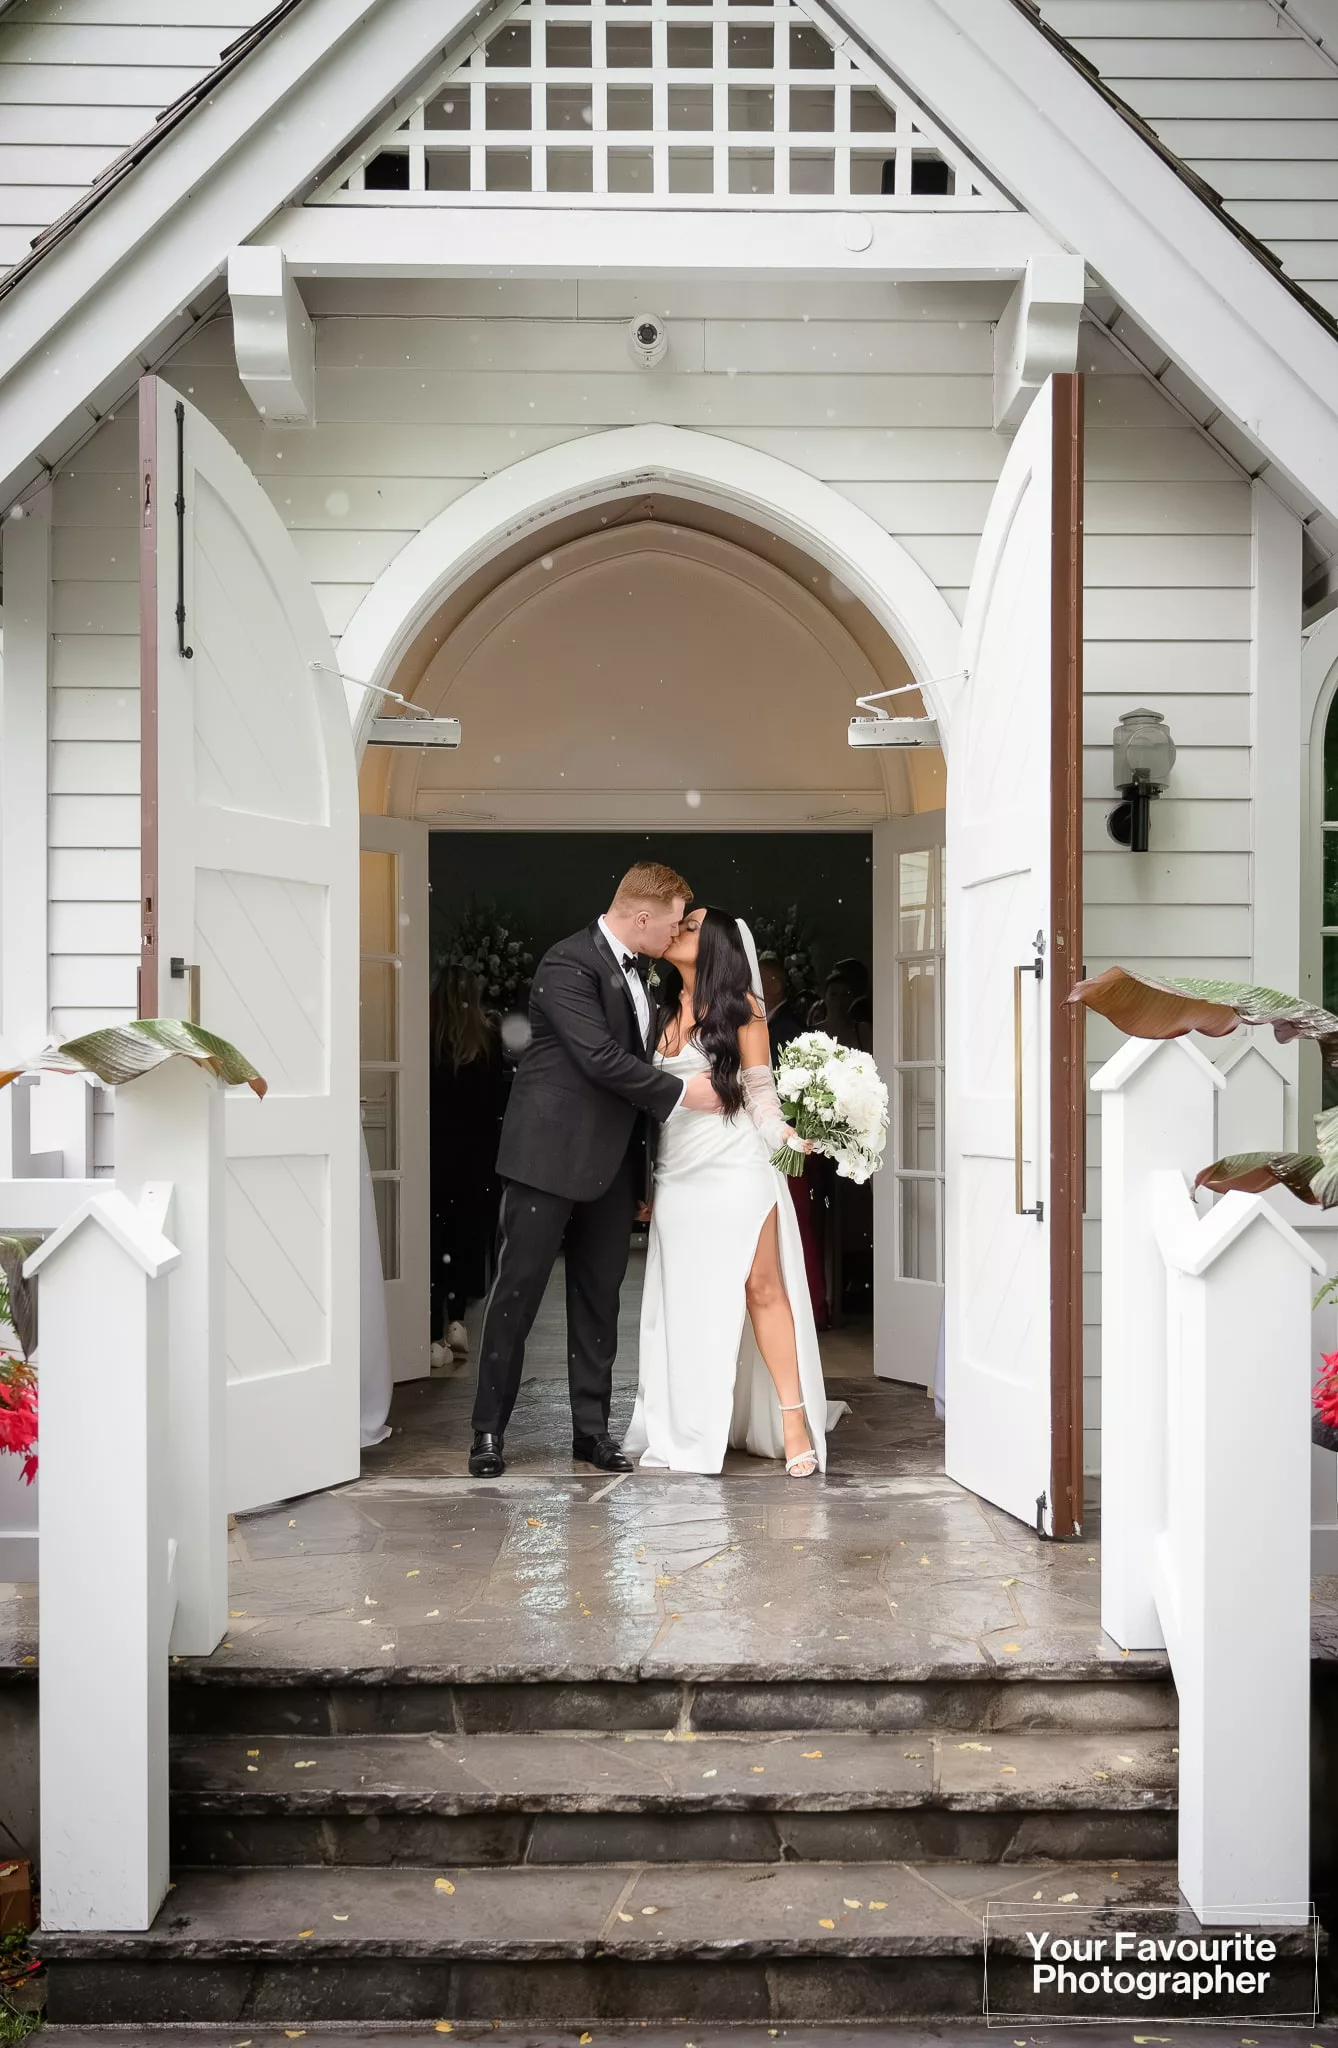 Outside The Doctor's House chapel, Samantha and Robert share a kiss